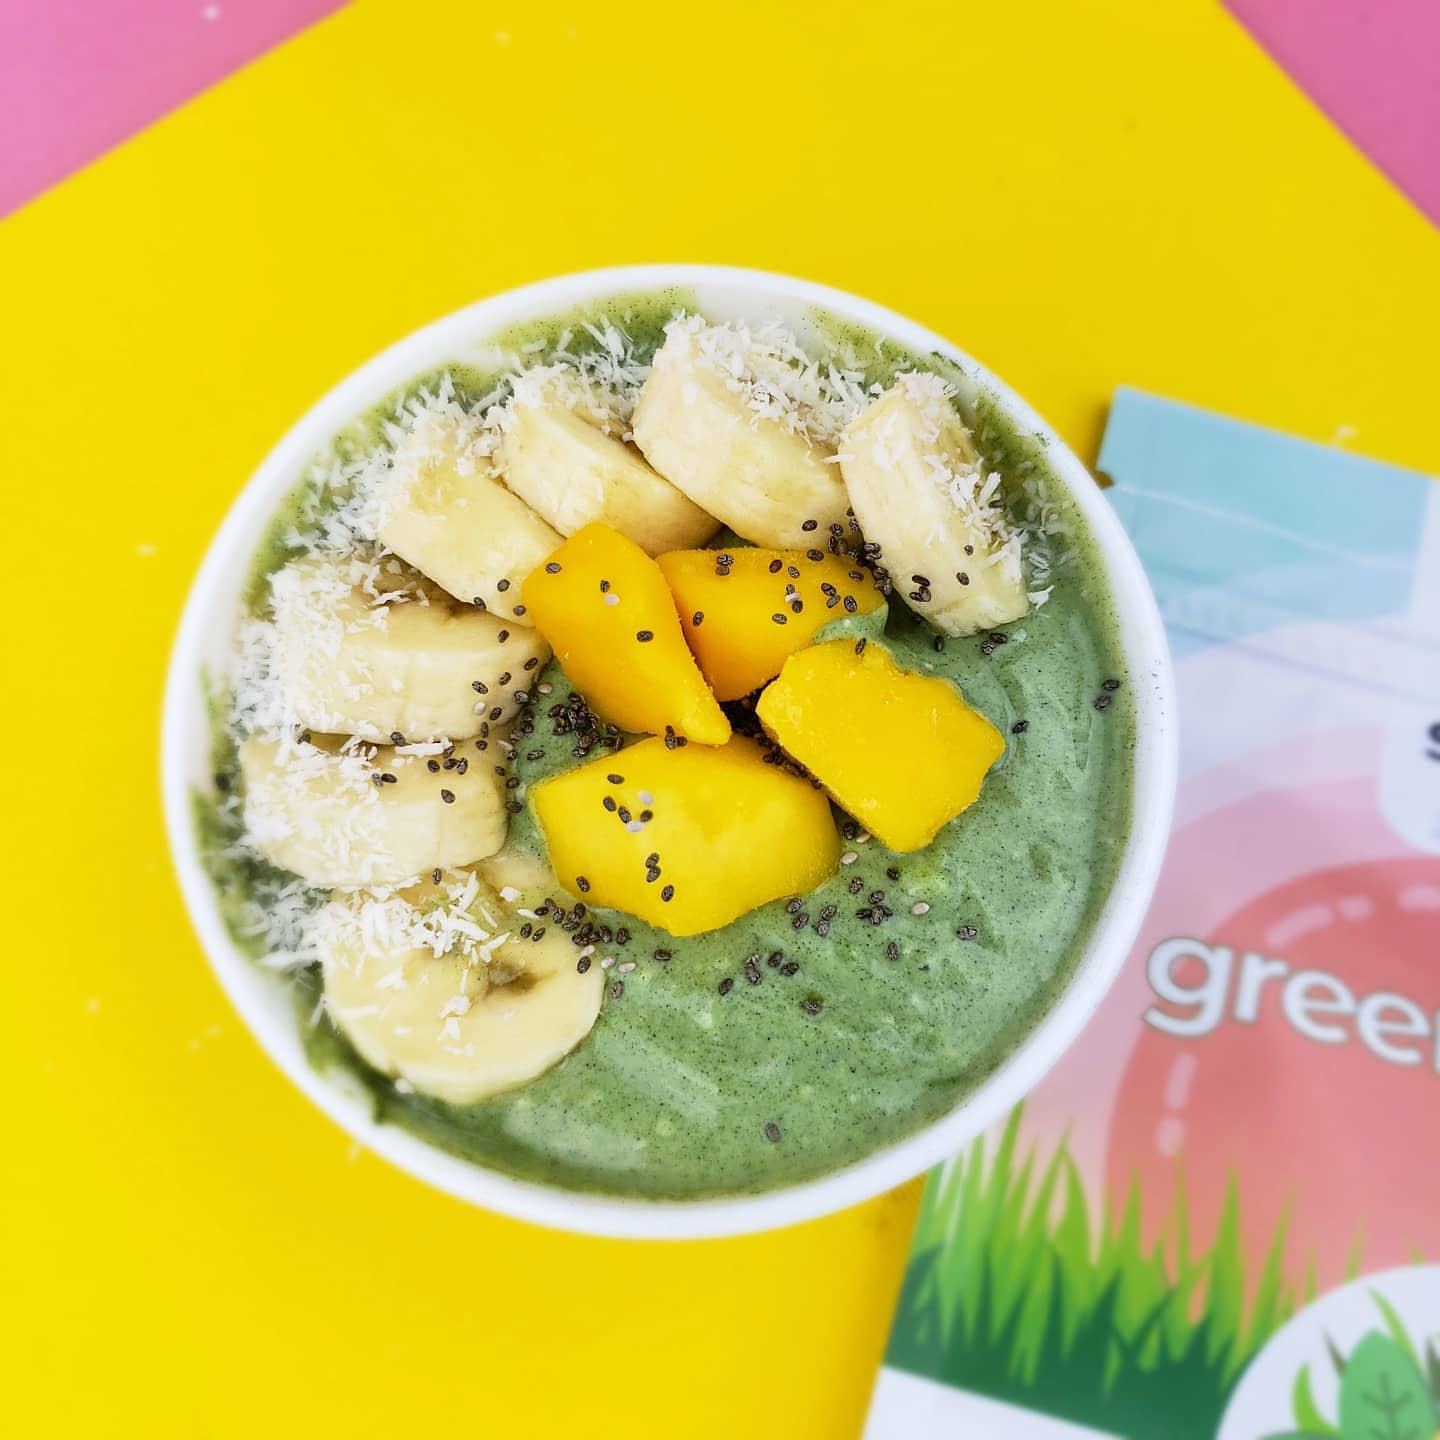 A spoonful of SMOOV green blend in peach flavoured yogurt helps you get your greens in, energize, cleanse, detox and fight bloat. Perfect part of a healthy weight loss diet.